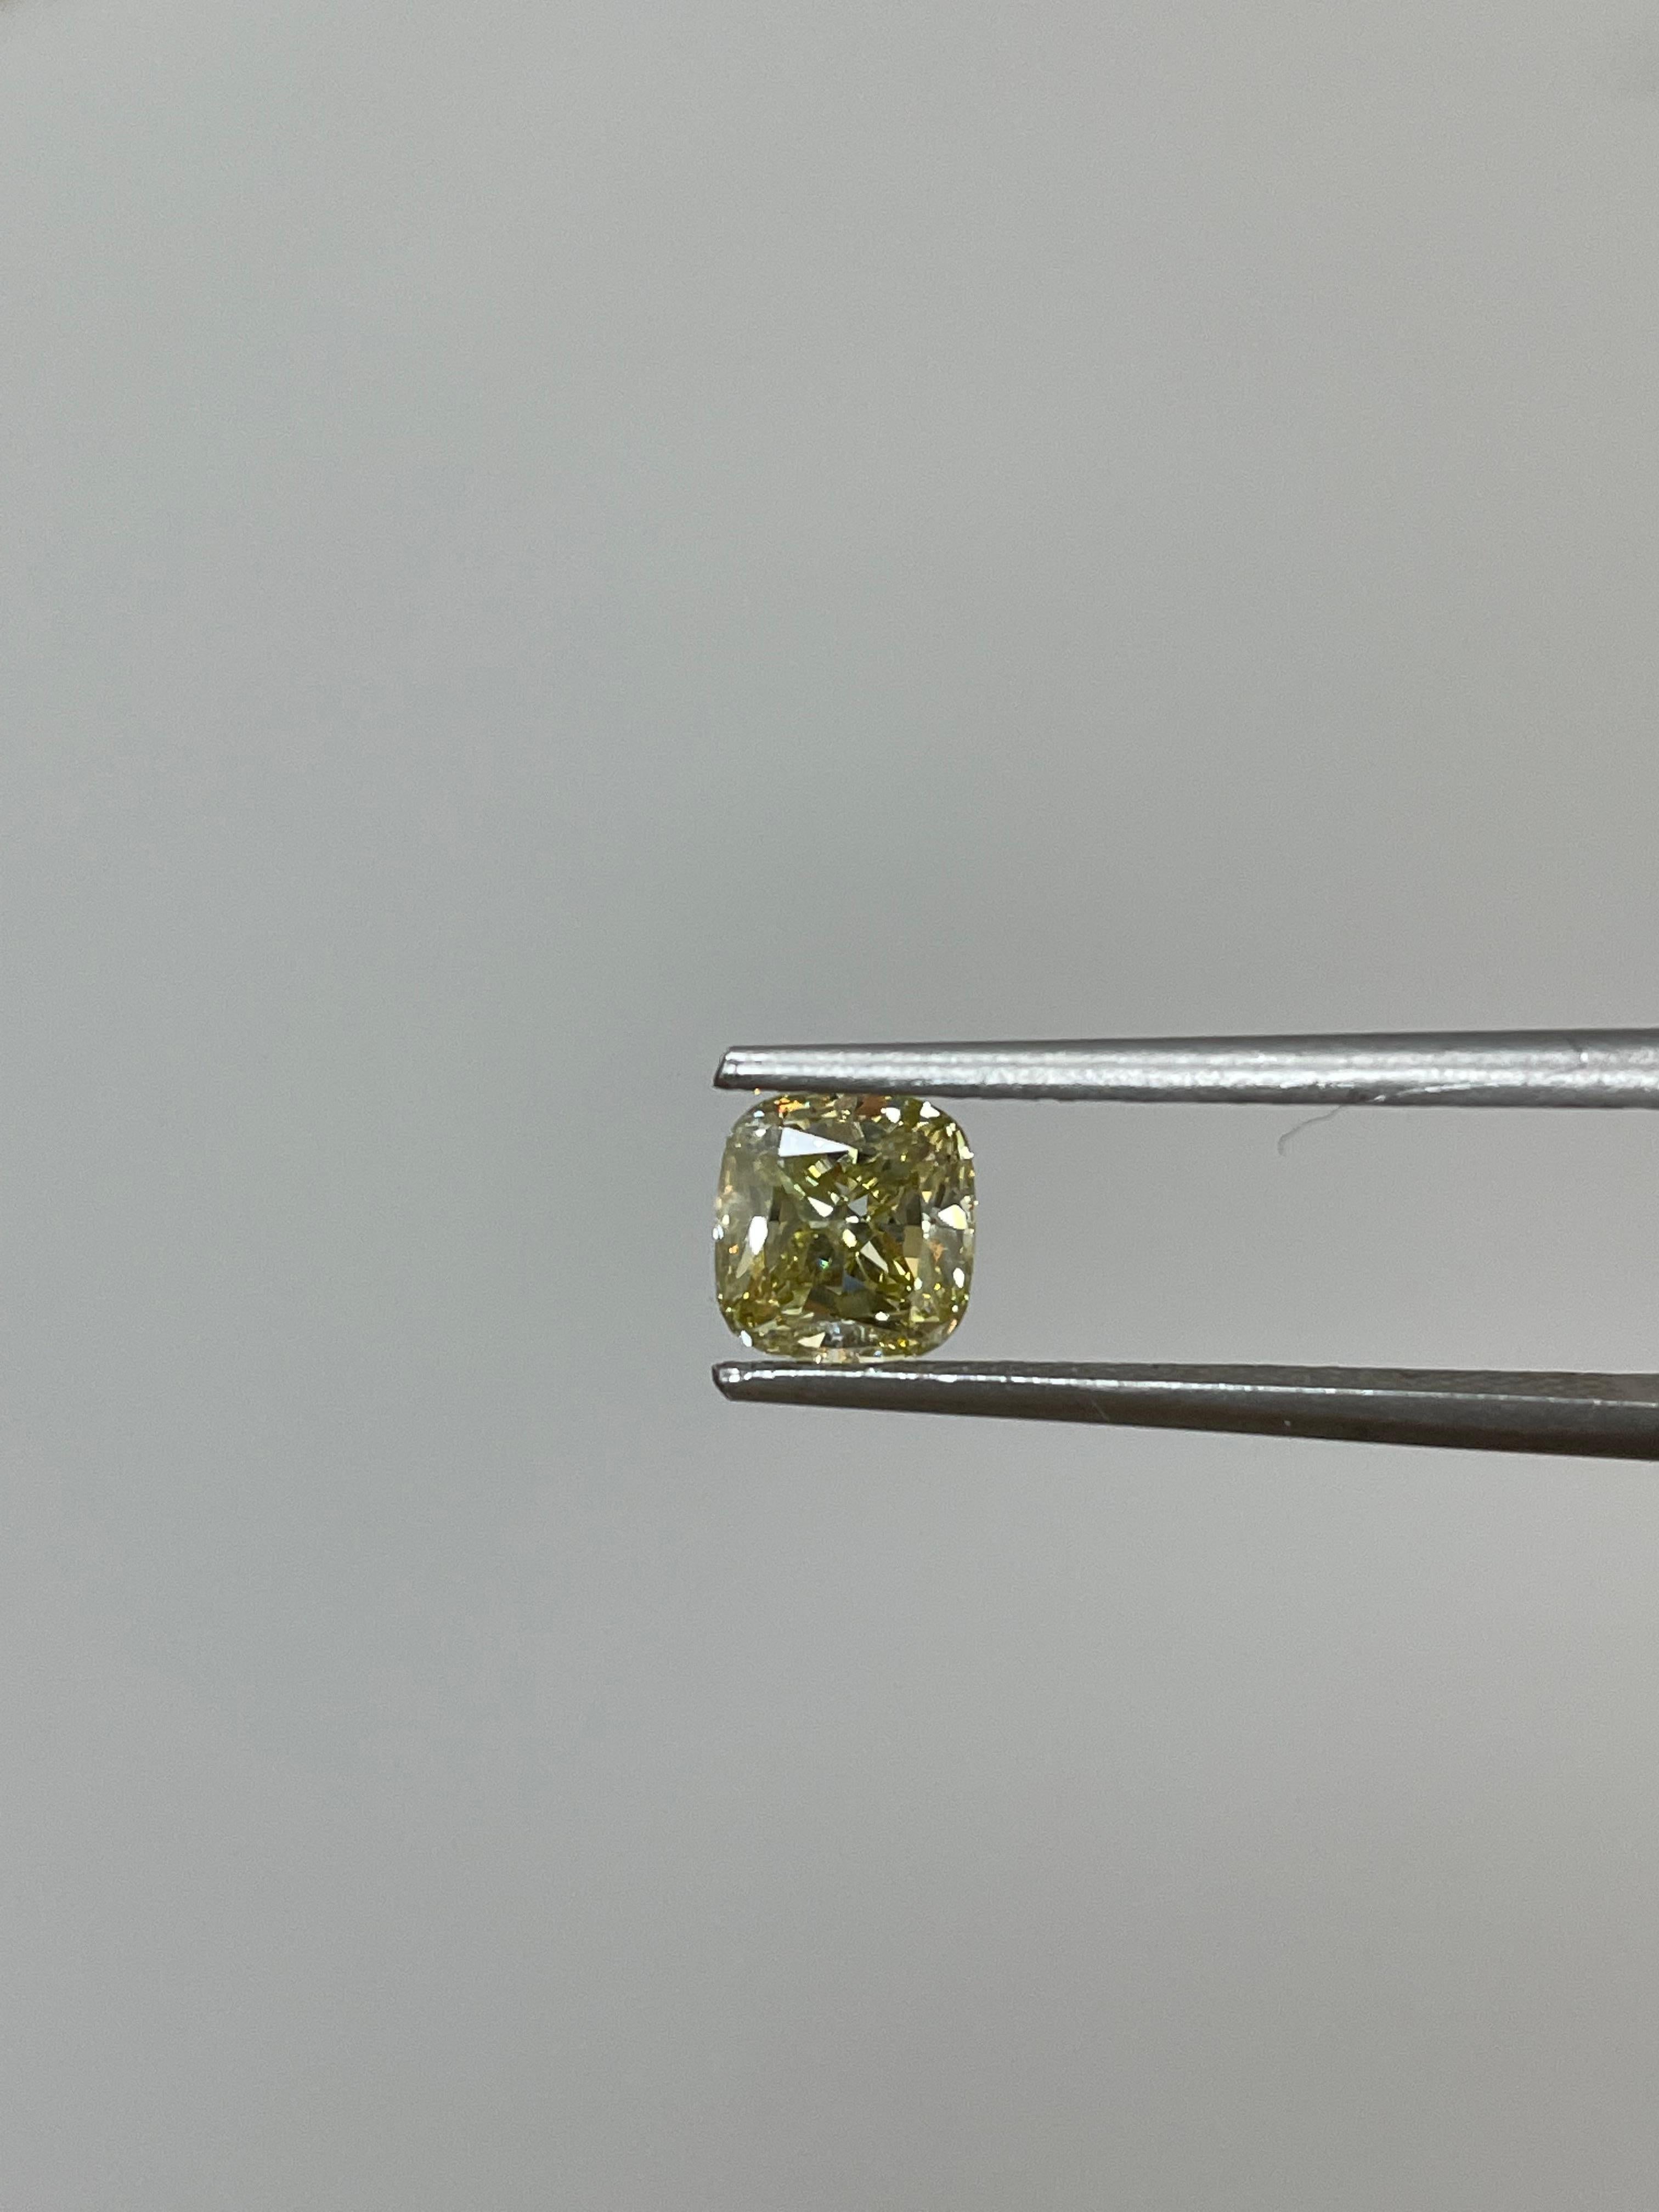 ITEM DESCRIPTION

ID #: NYC56237
Stone Shape:	CUSHION MODIFIED BRILLIANT
Diamond Weight:	1.01ct
Clarity:	NATURAL
Color:	Fancy Brownish Greenish Yellow
Cut:	Excellent
Measurements: 5.98 x 5.68 x 3.60 mm
Symmetry: Very Good
Polish: Very